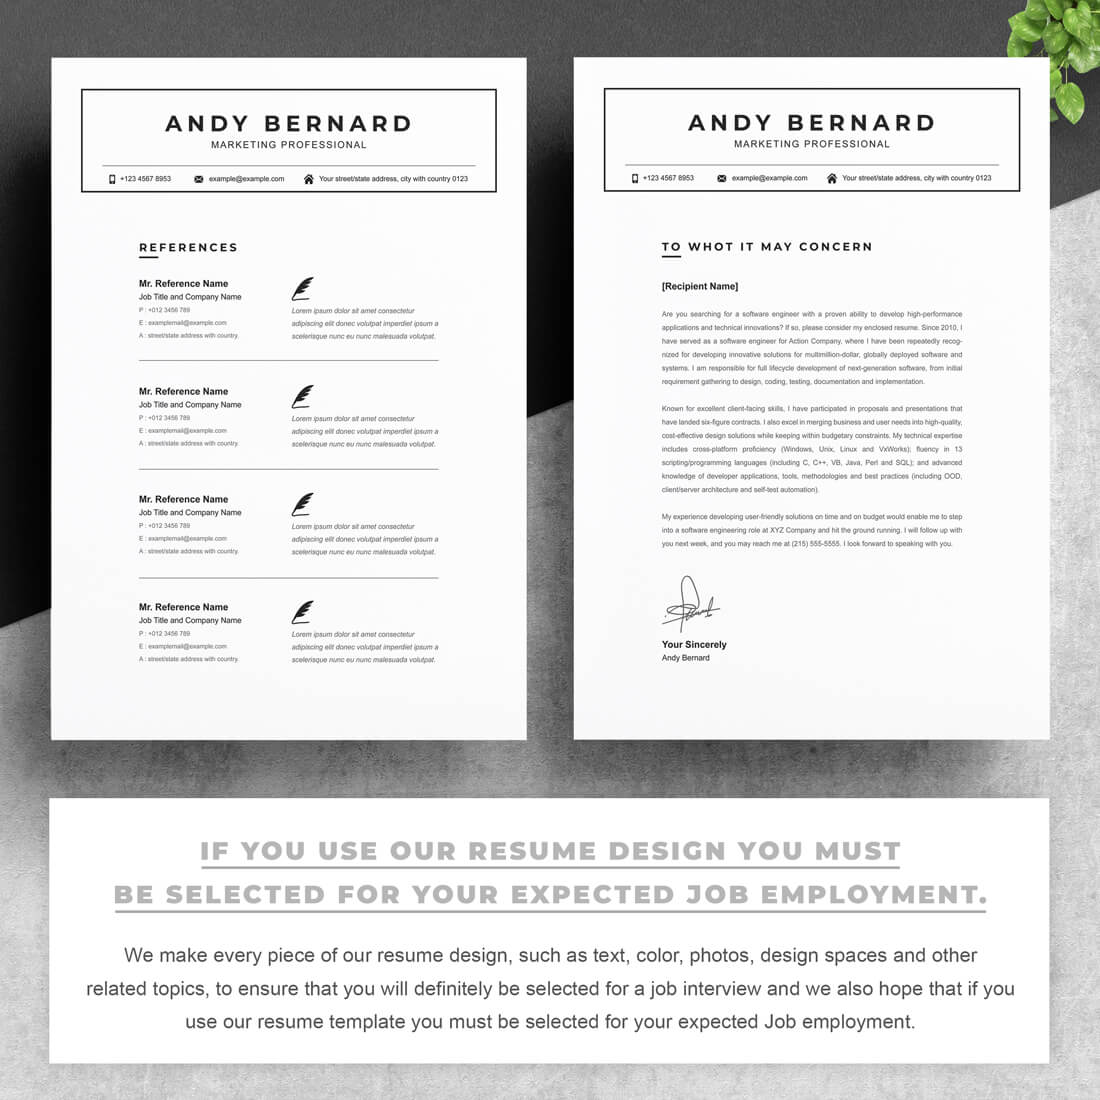 Two pages of the Marketing Professional Resume Template.